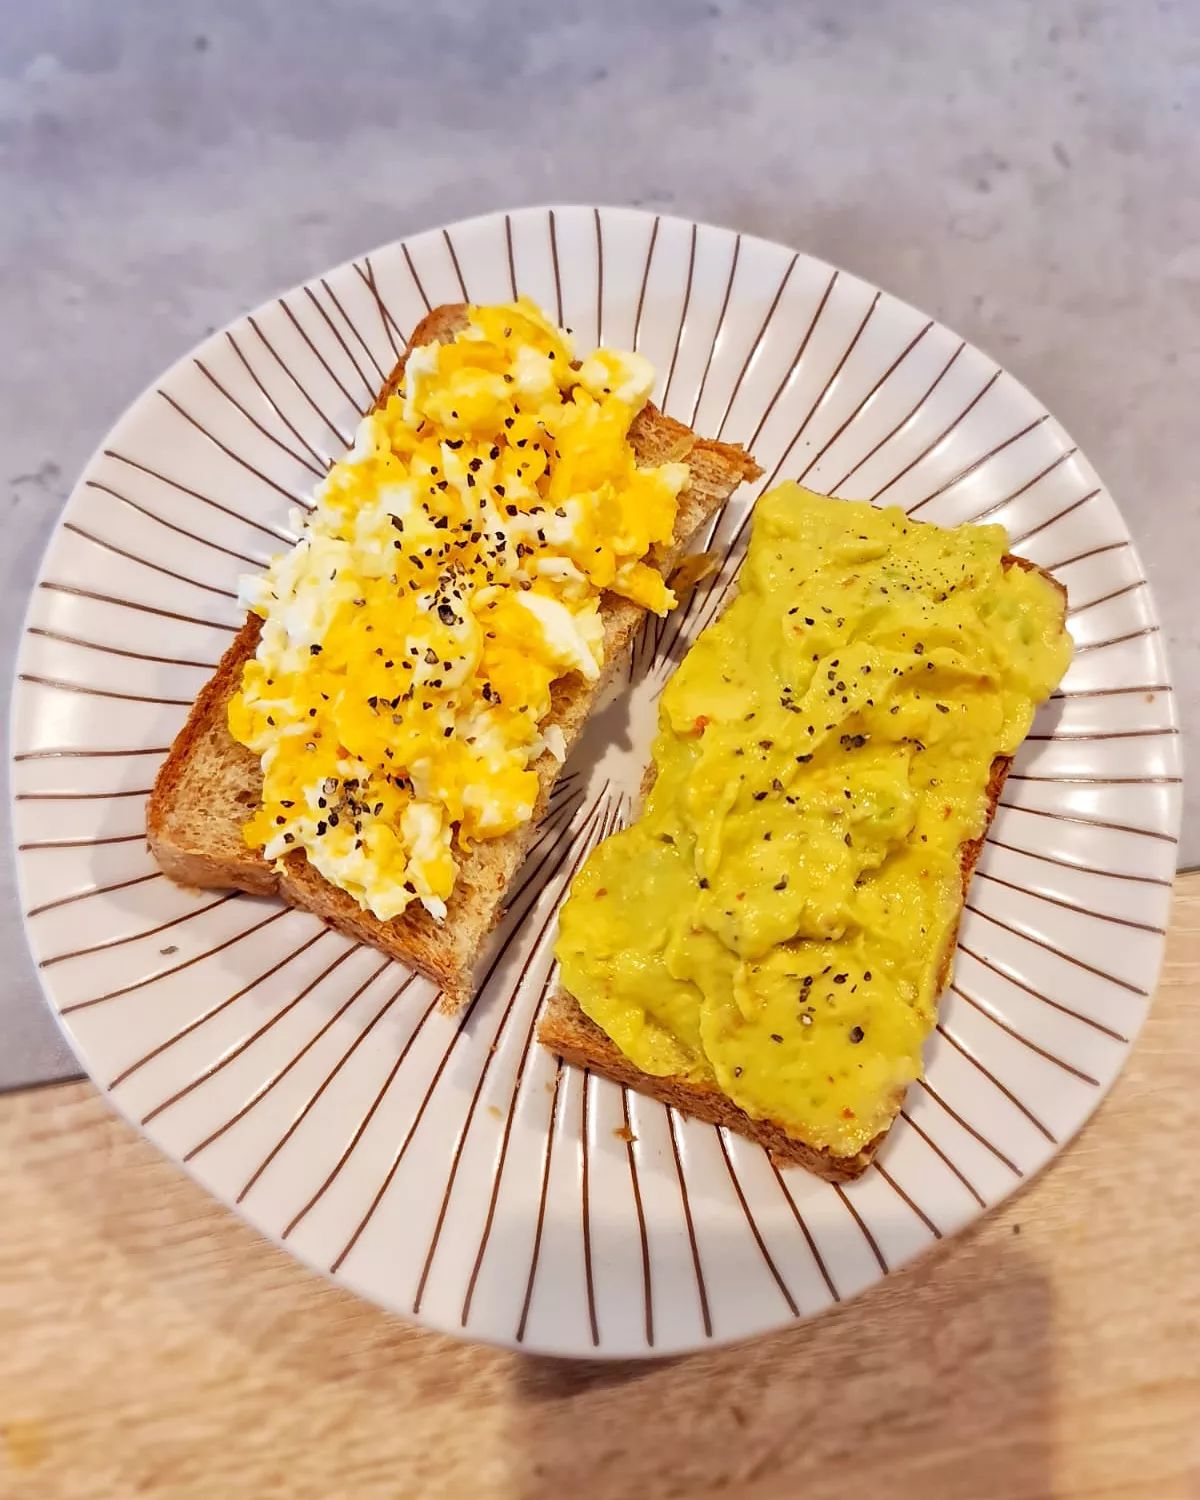 Avocado and egg toast, which one do you like the most?